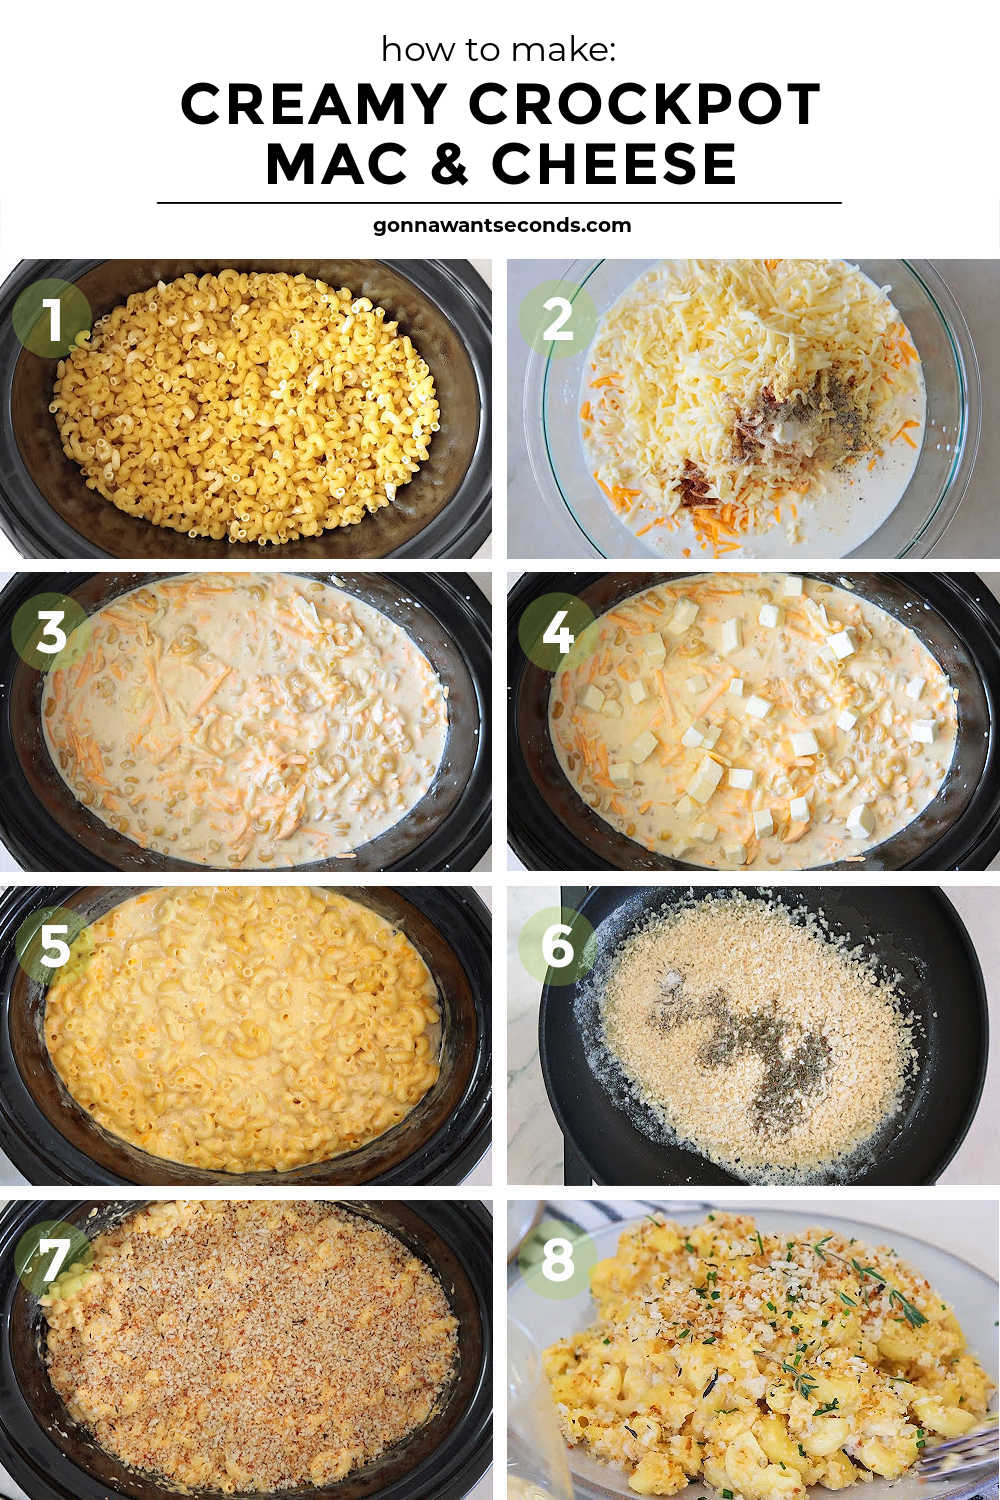 Step by step how to make crockpot mac and cheese